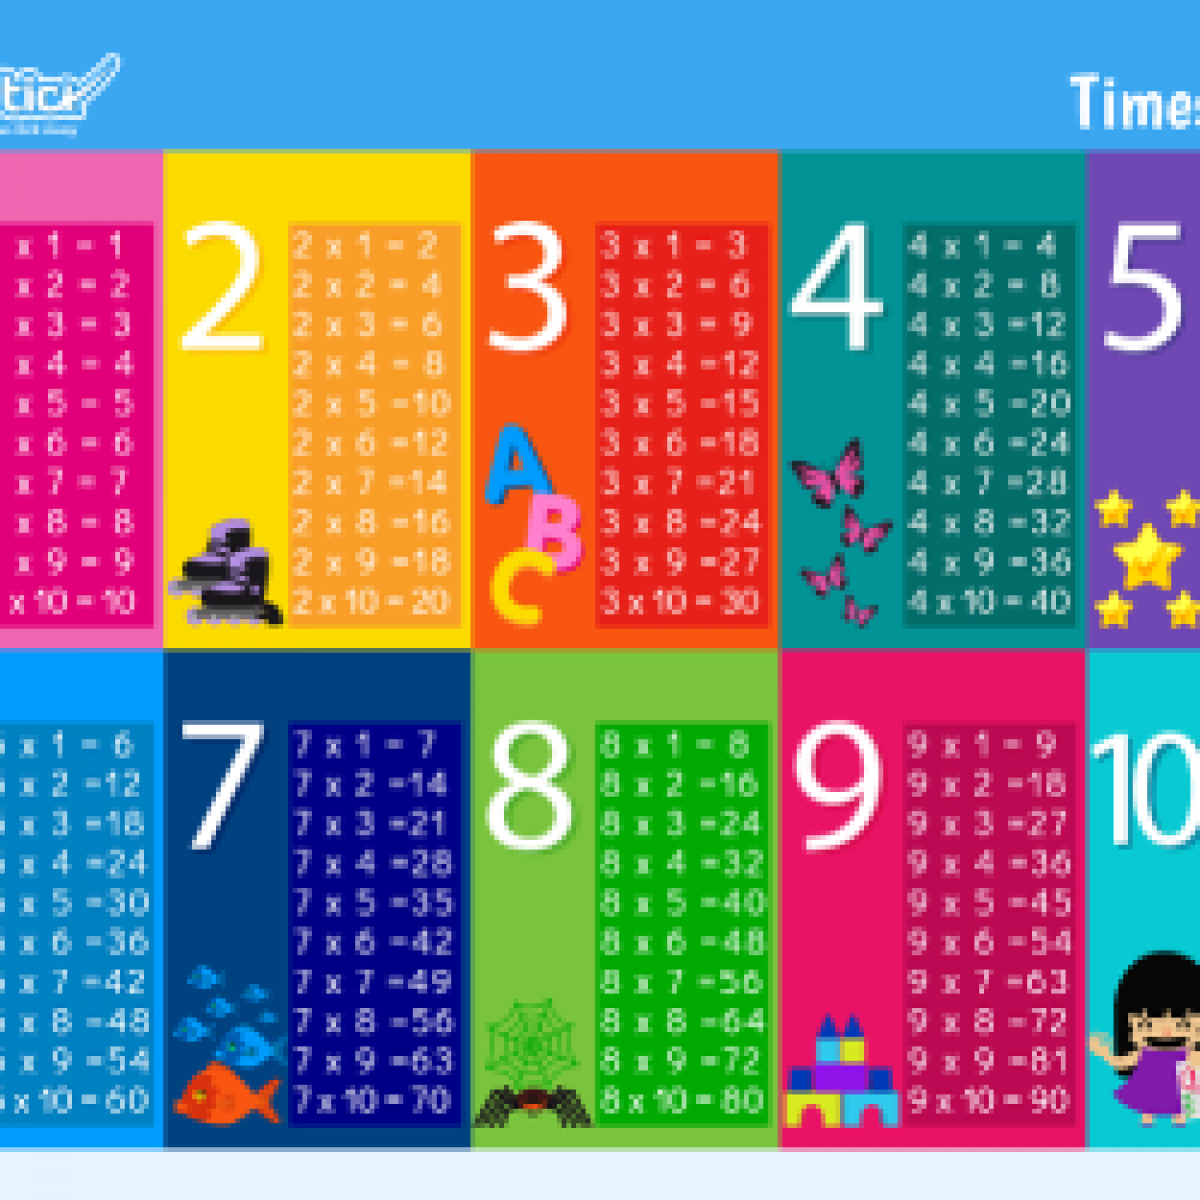 Times Tables To Download And Print Smartick